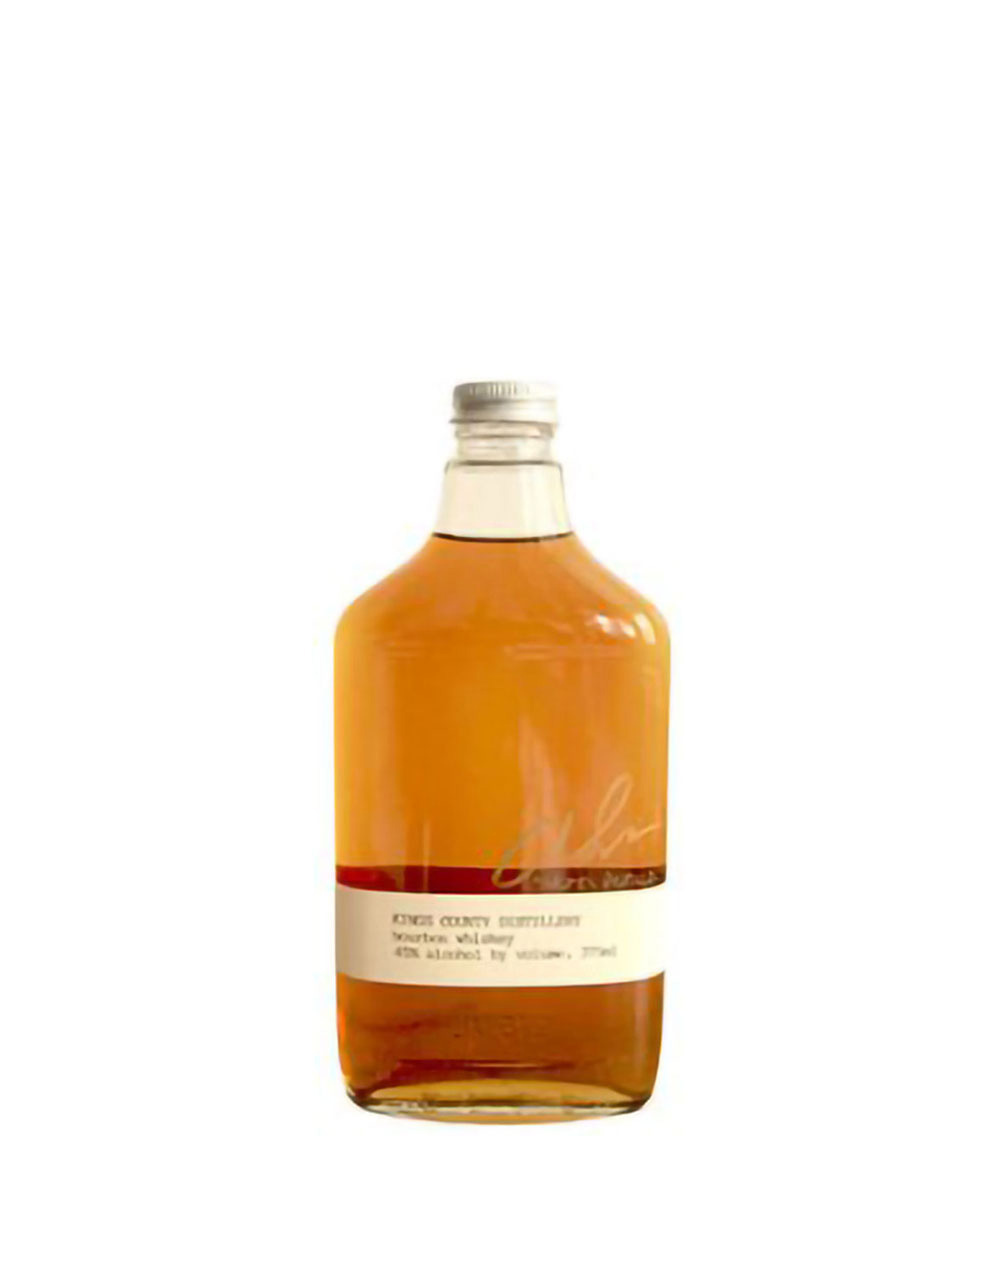 Kings County Signature Edition Bourbon Whiskey